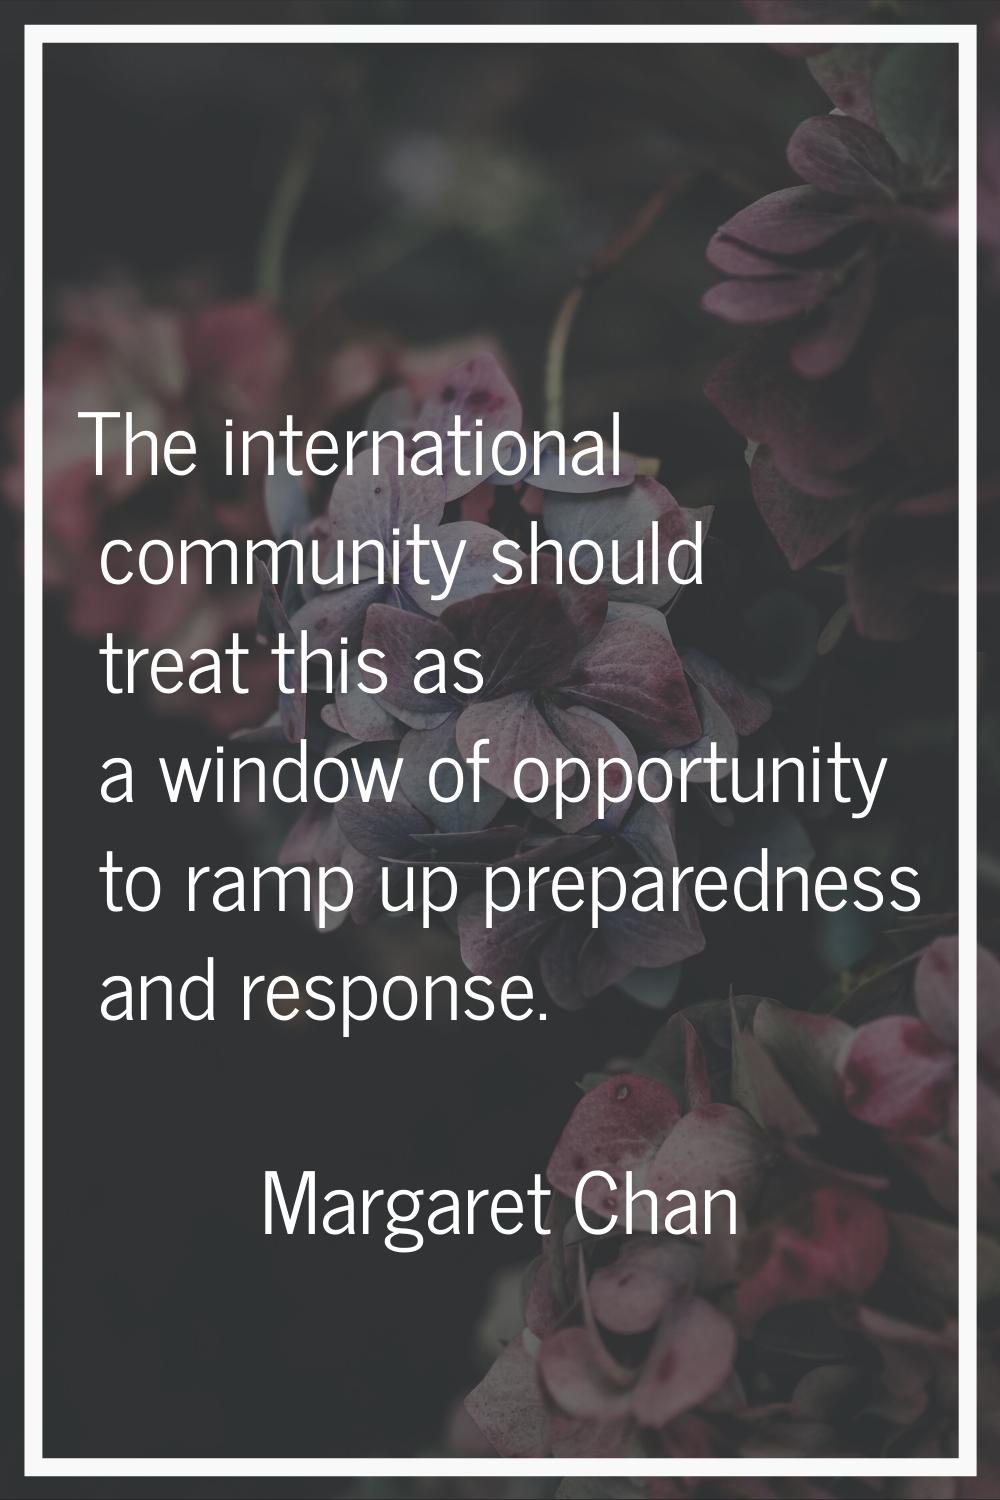 The international community should treat this as a window of opportunity to ramp up preparedness an